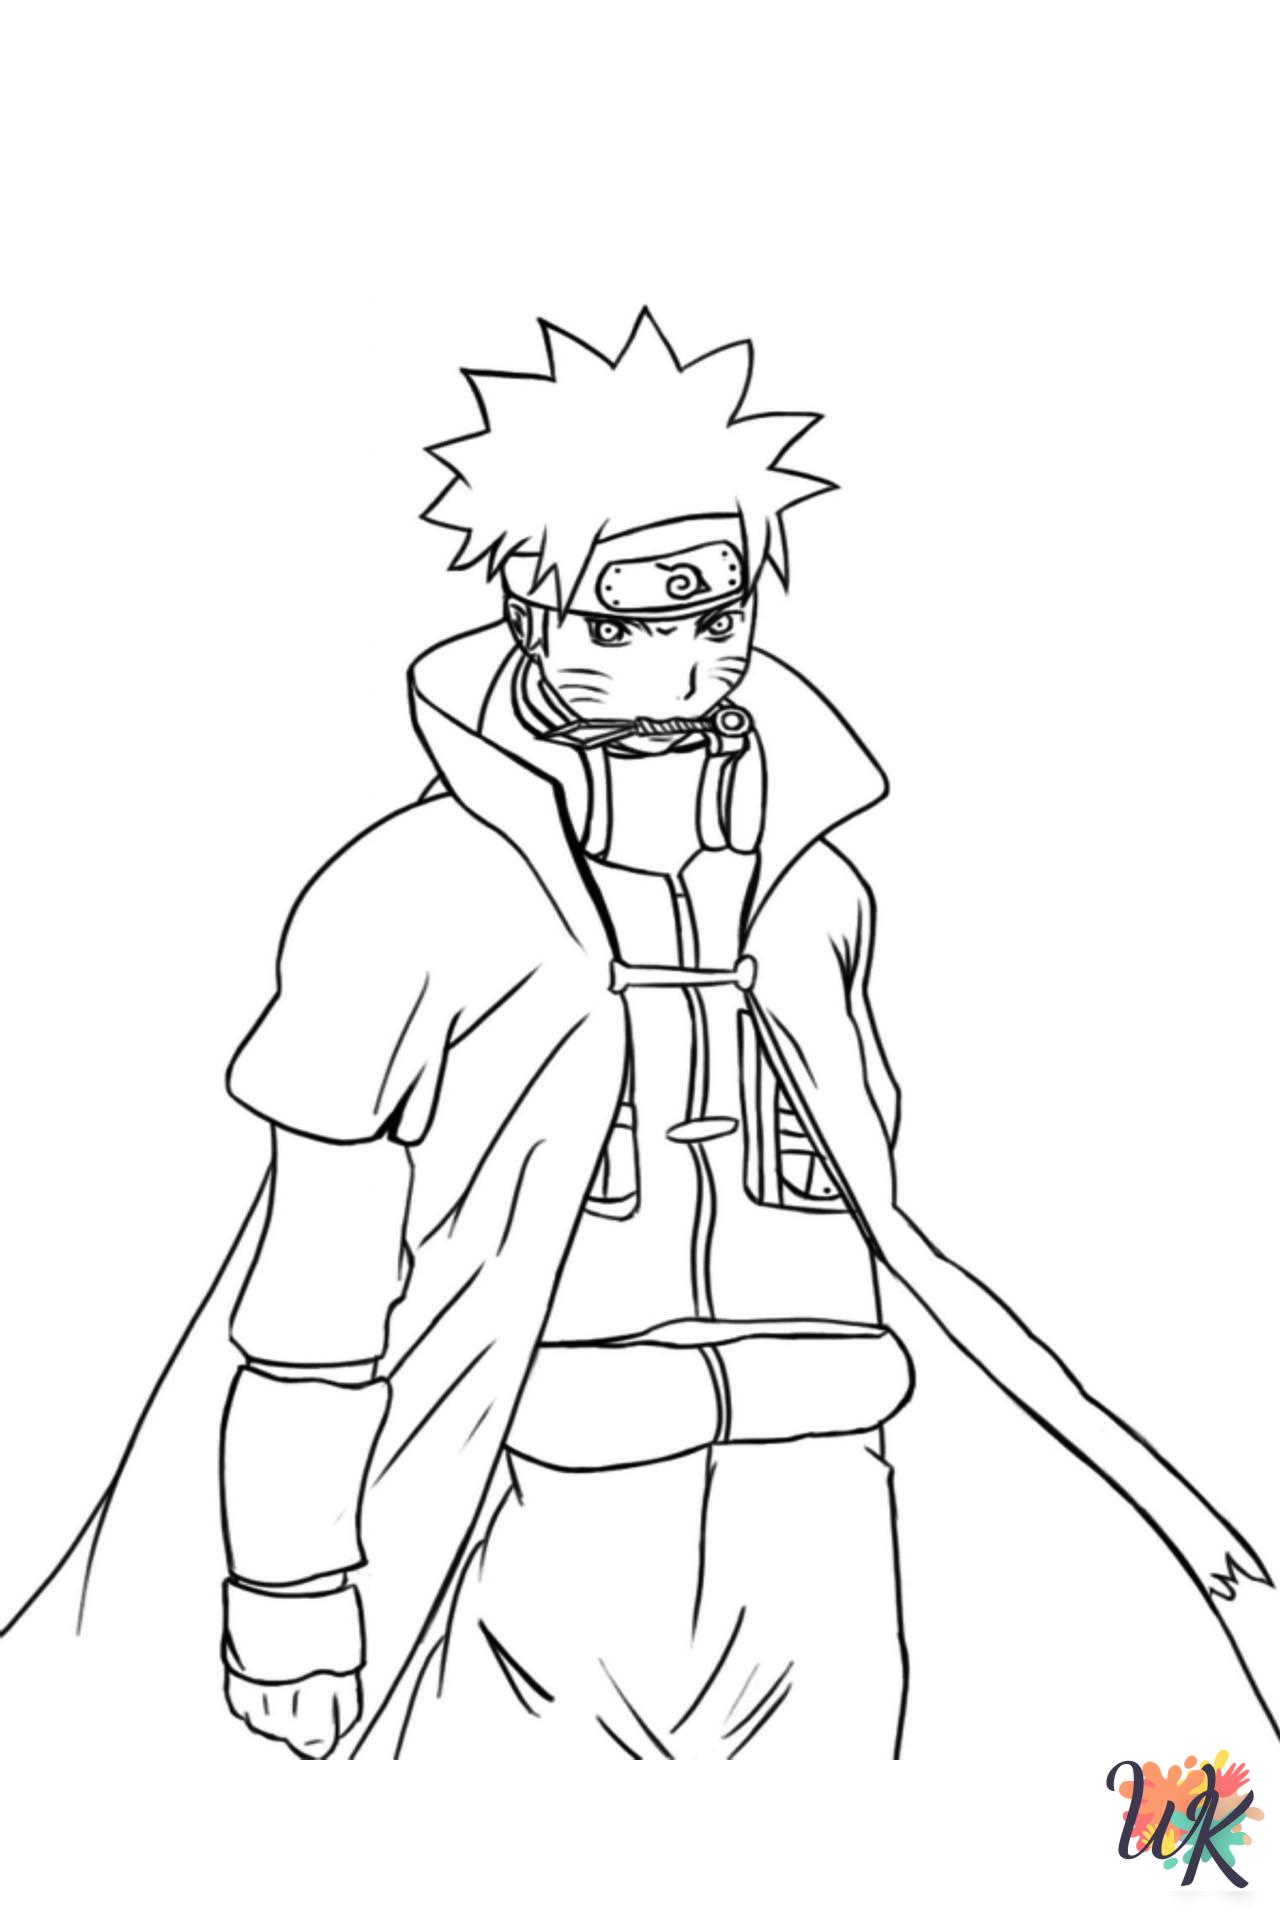 easy Naruto coloring pages